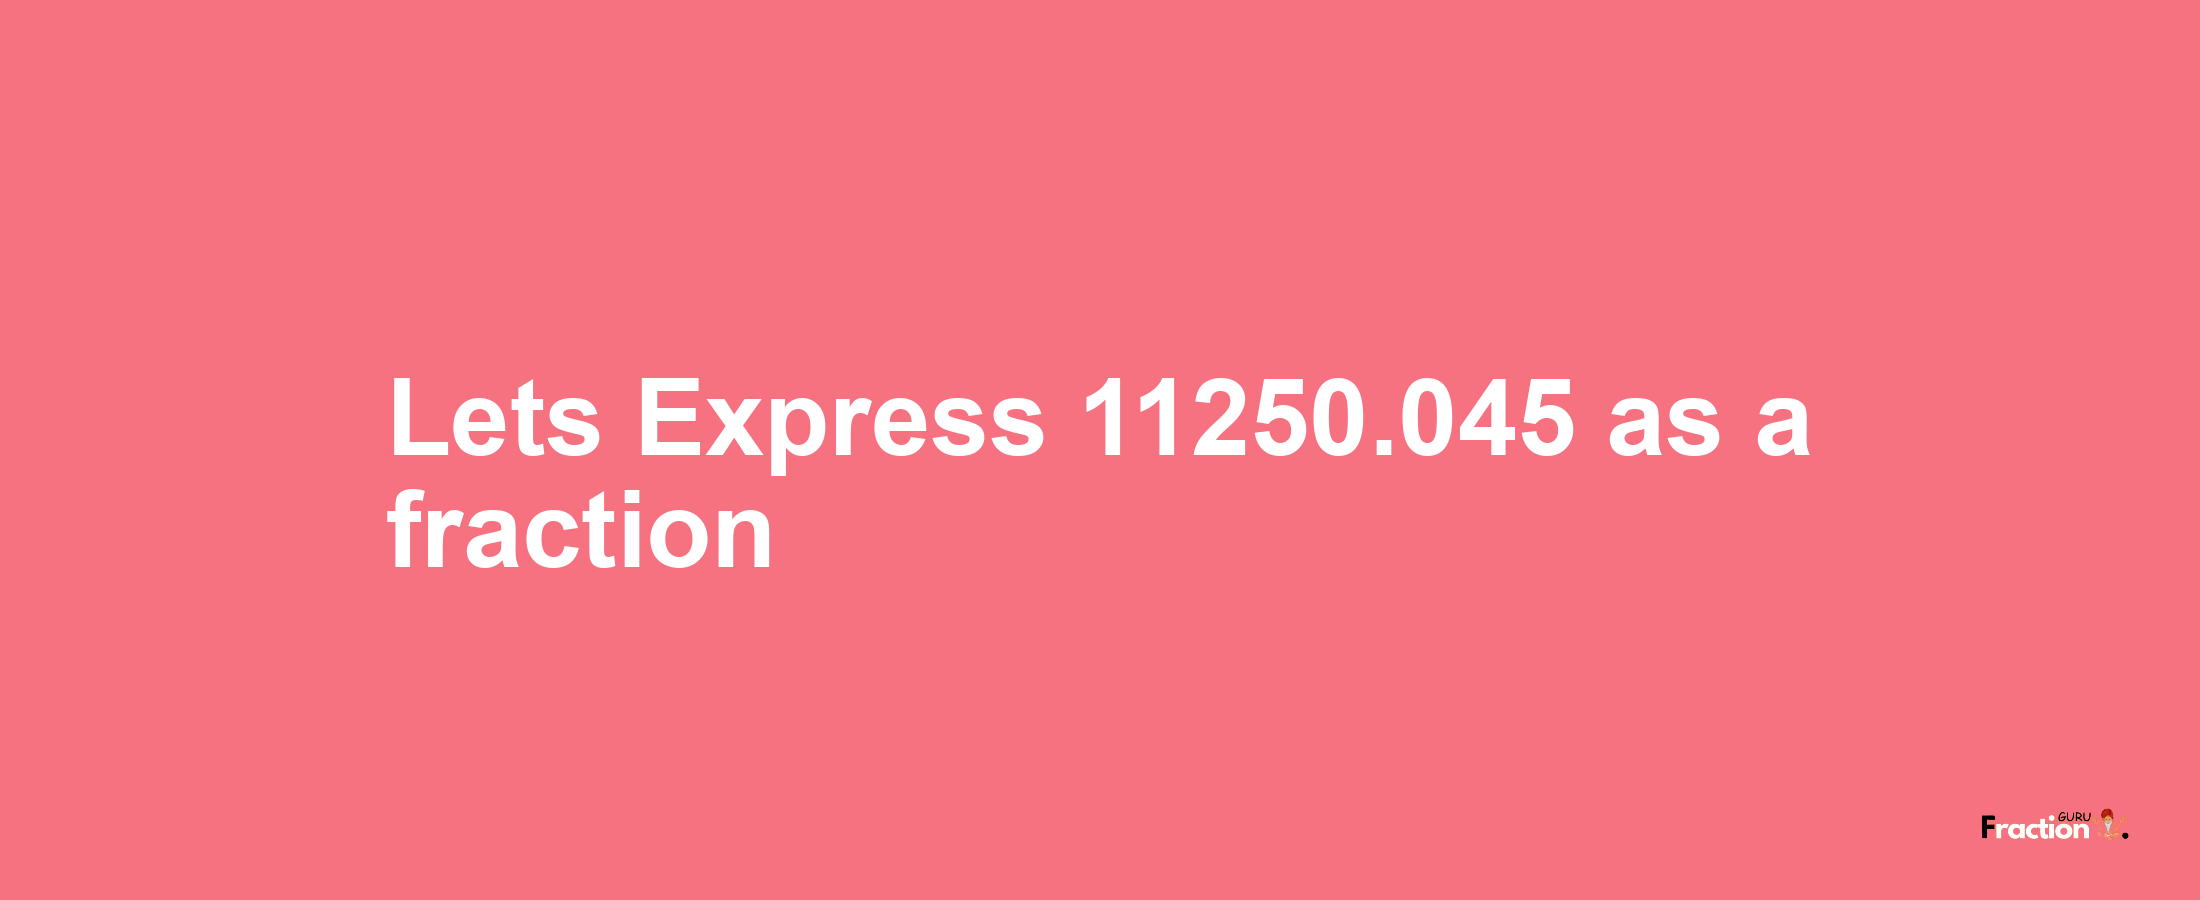 Lets Express 11250.045 as afraction